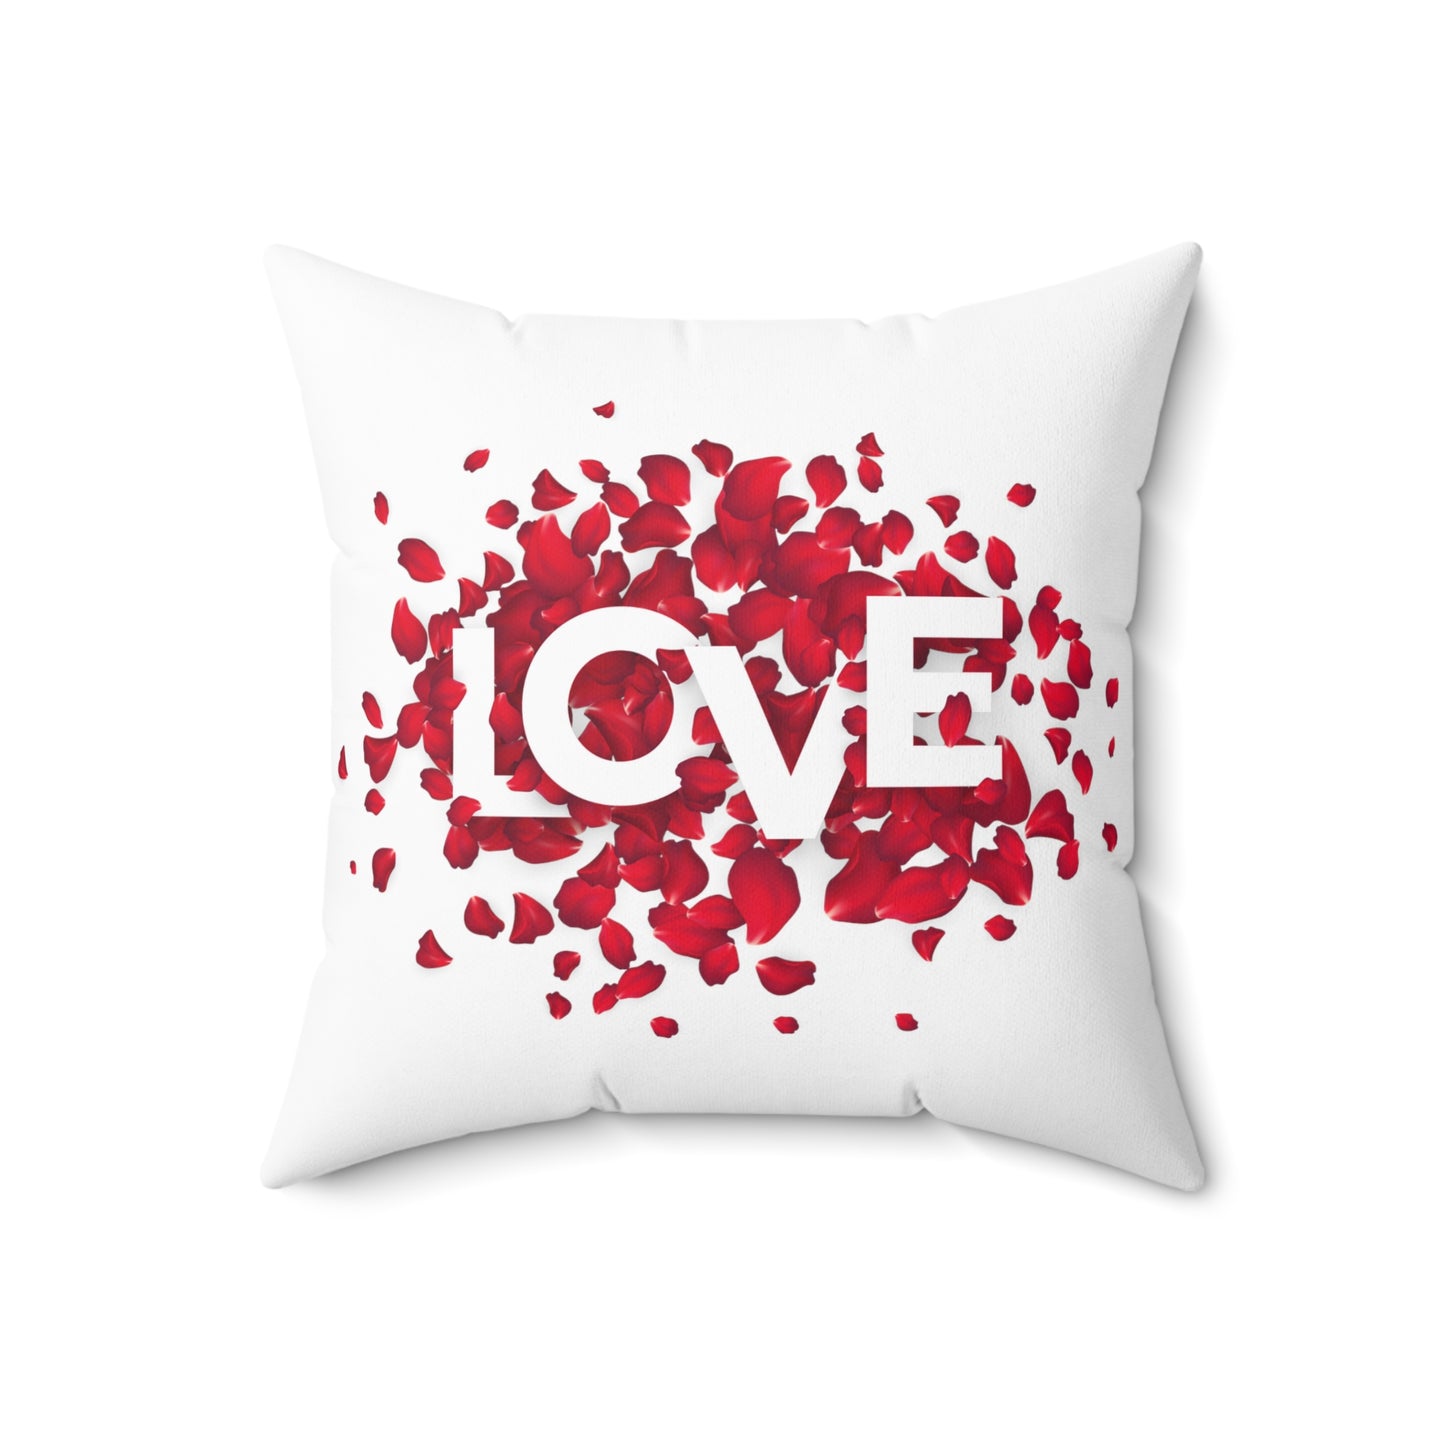 Love with Heart Made of Flowers Printed Polyester Sqaure Pillow